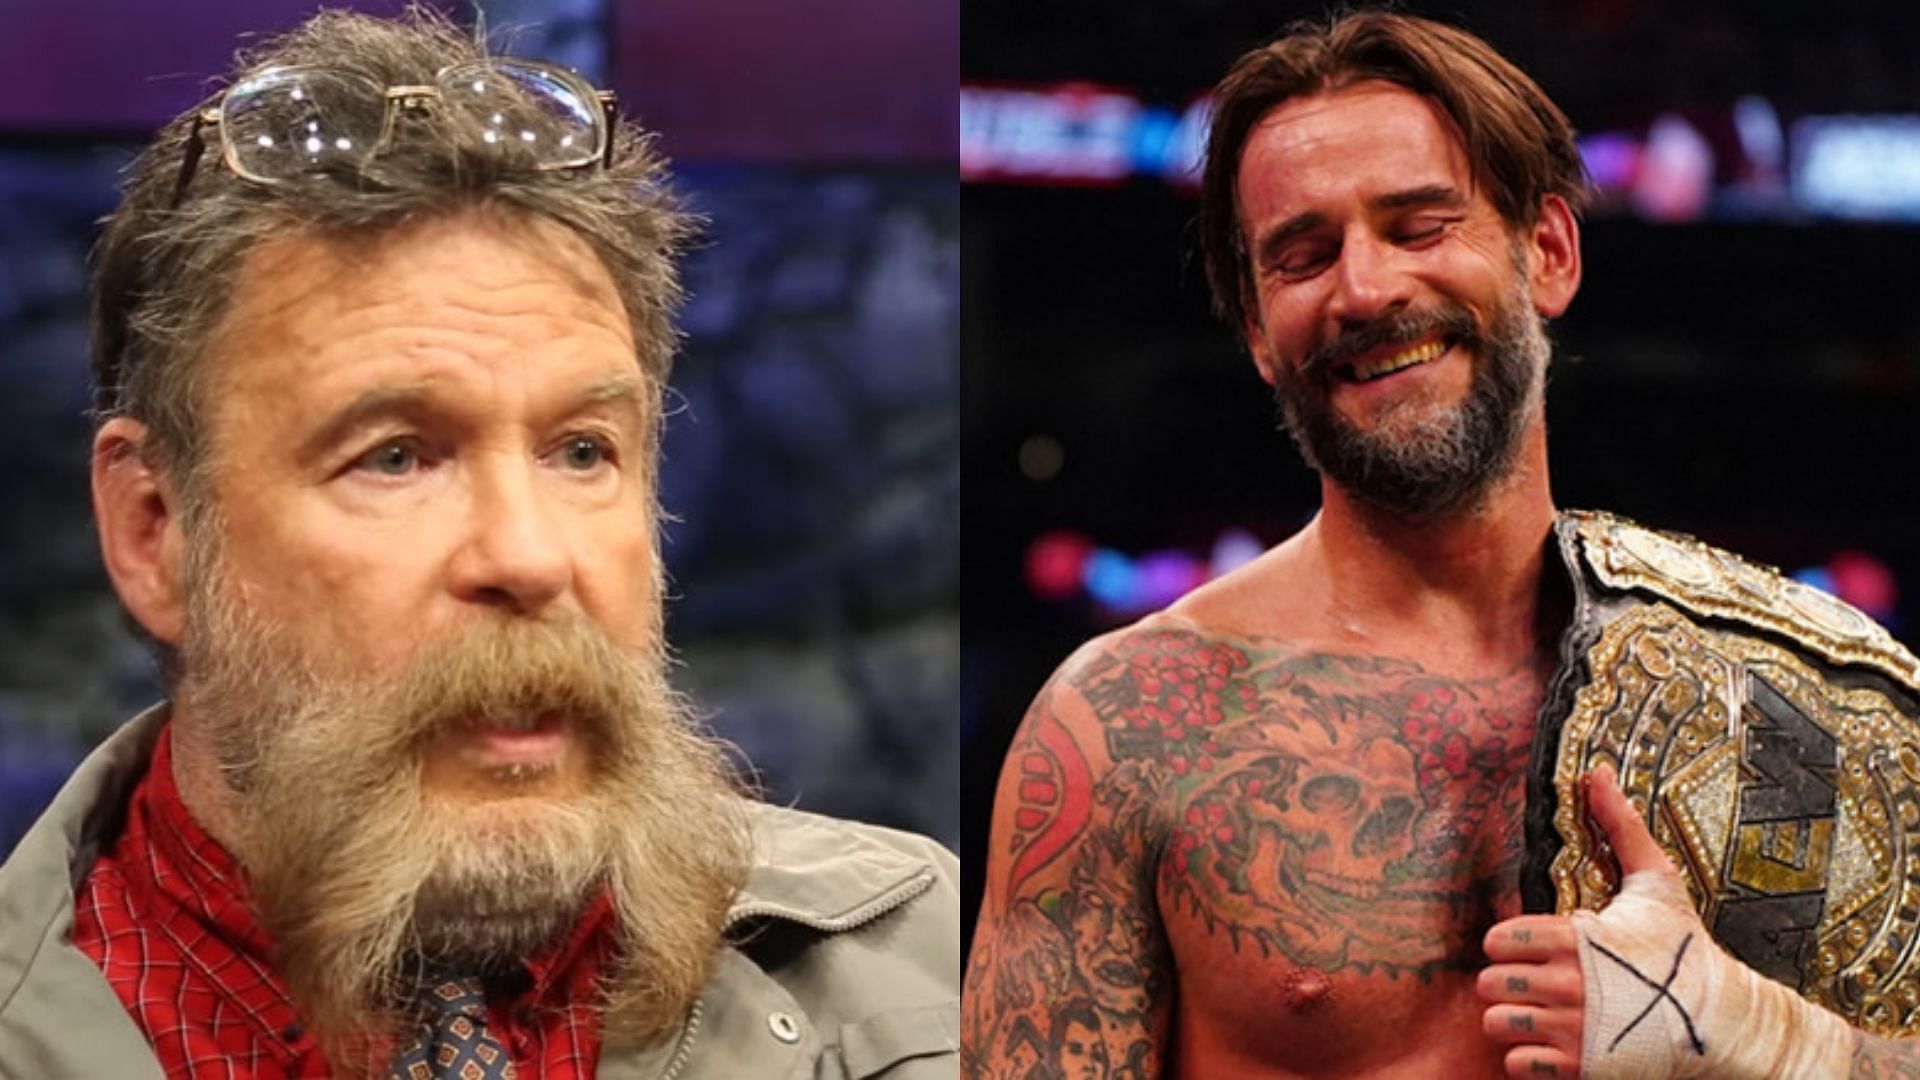 Dutch Mantell (left) and CM Punk (right).